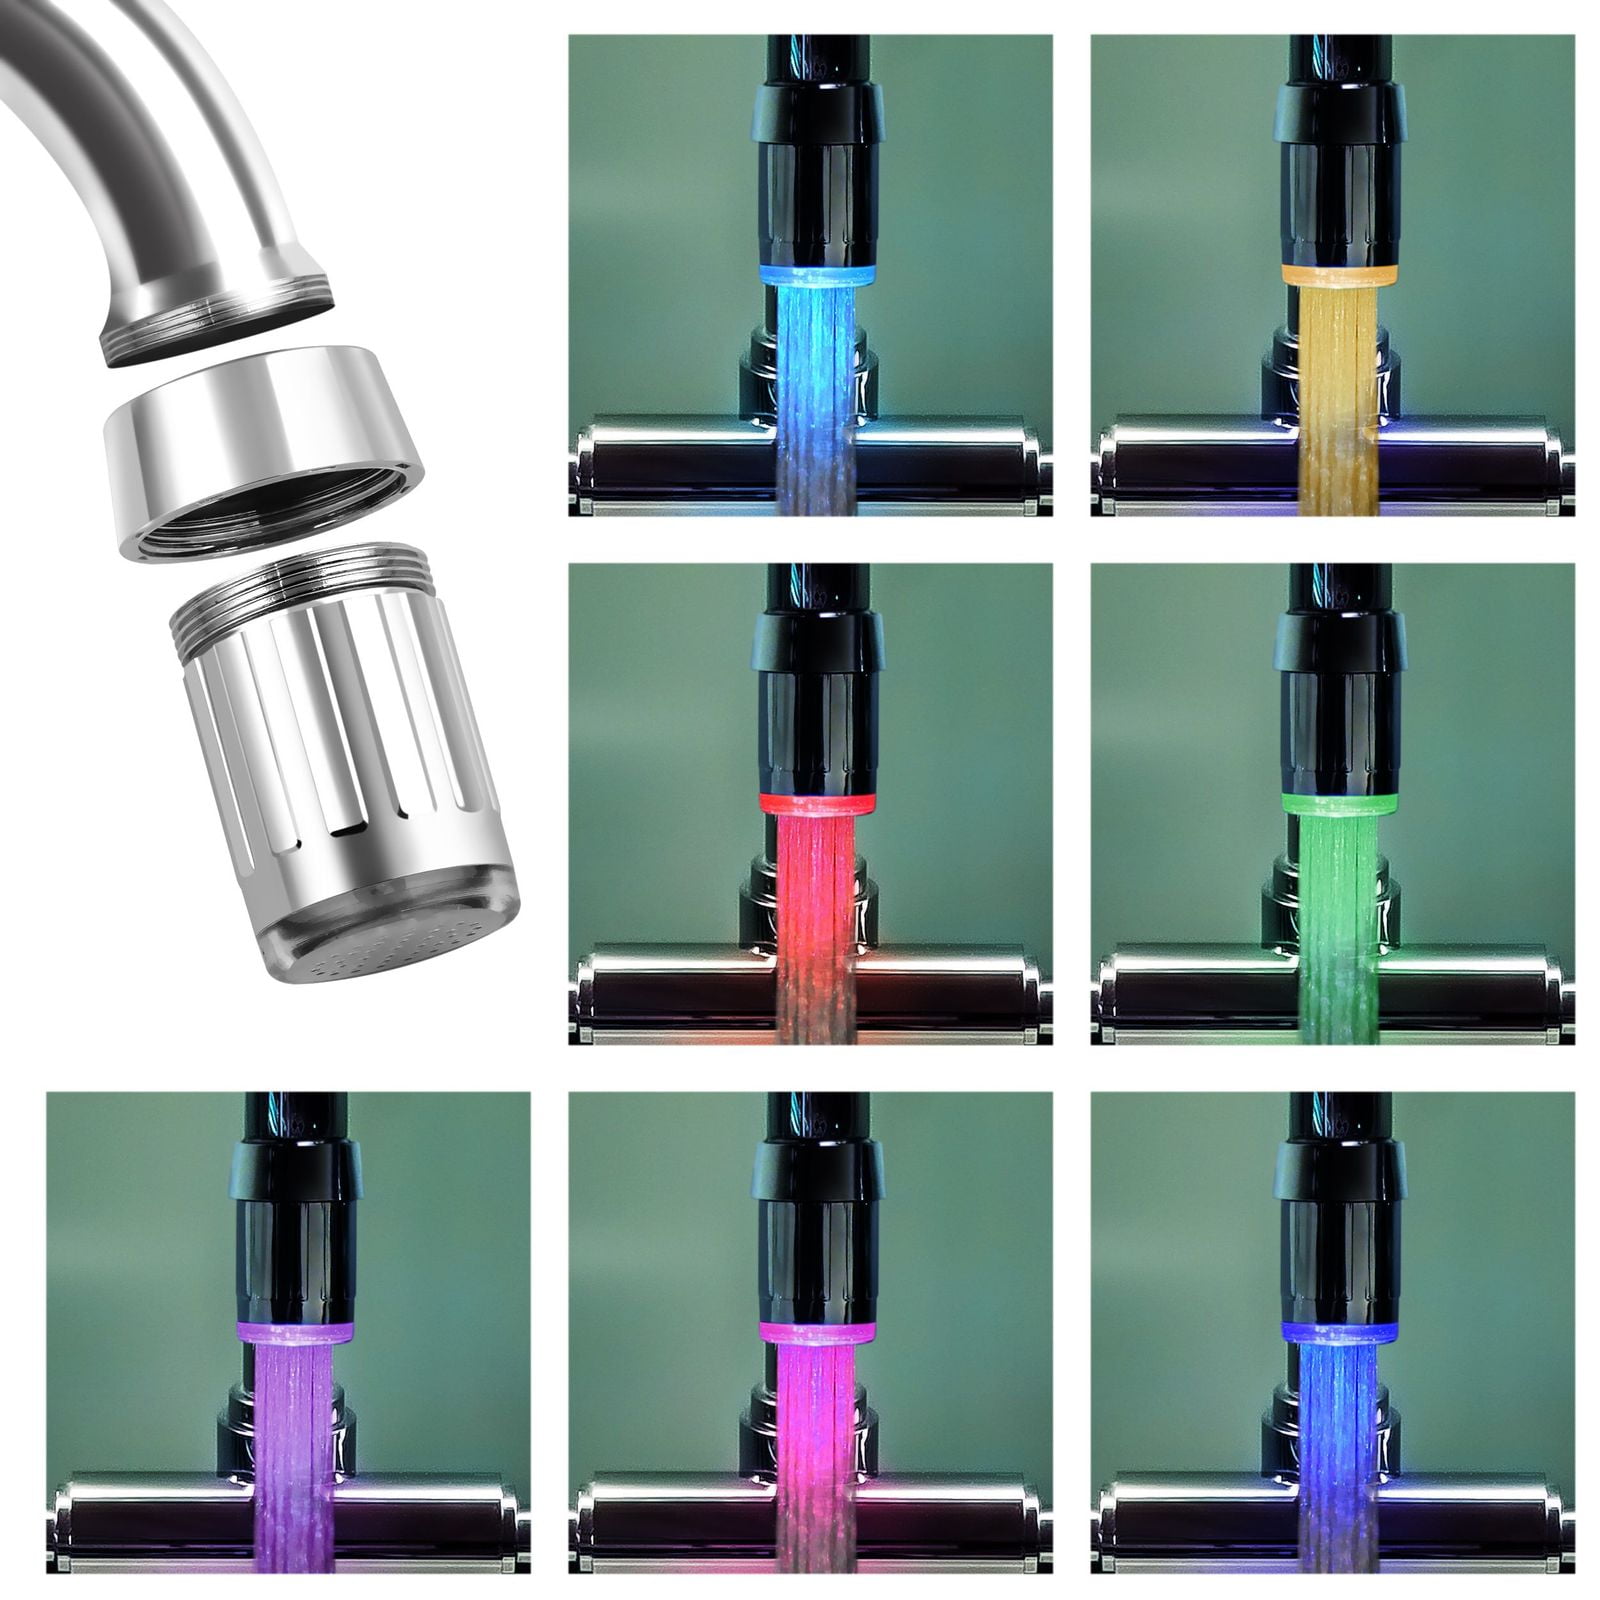 LED Water Stream Faucet Light 7 Colors Changing Shower Spout Sink w/ Tap HOT 